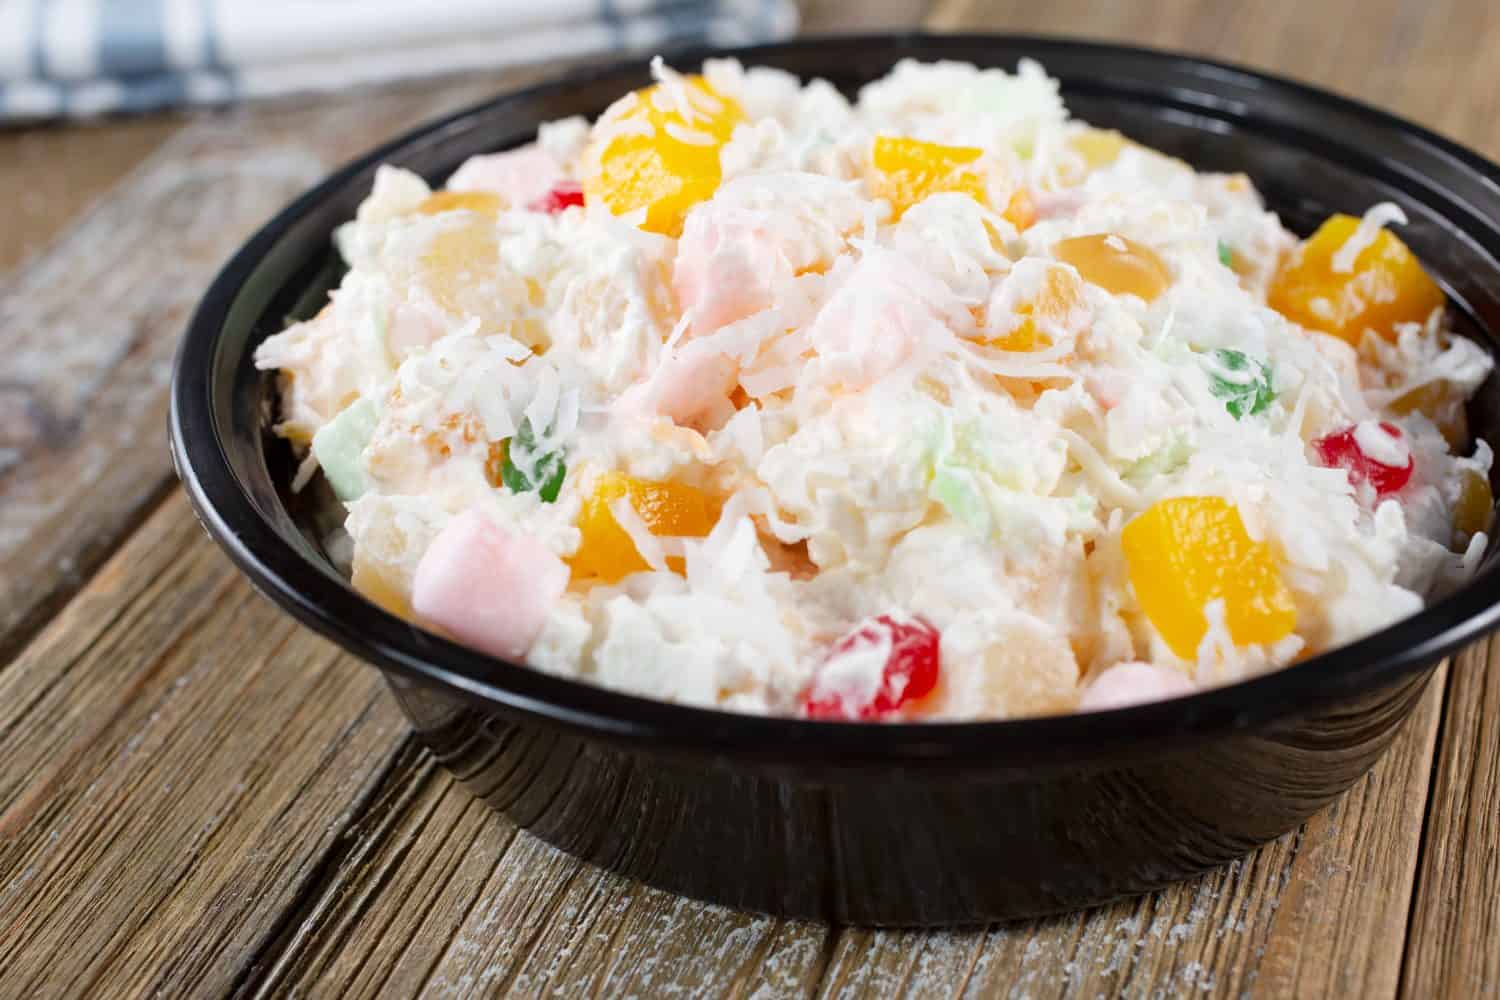 A view of an ambrosia salad.